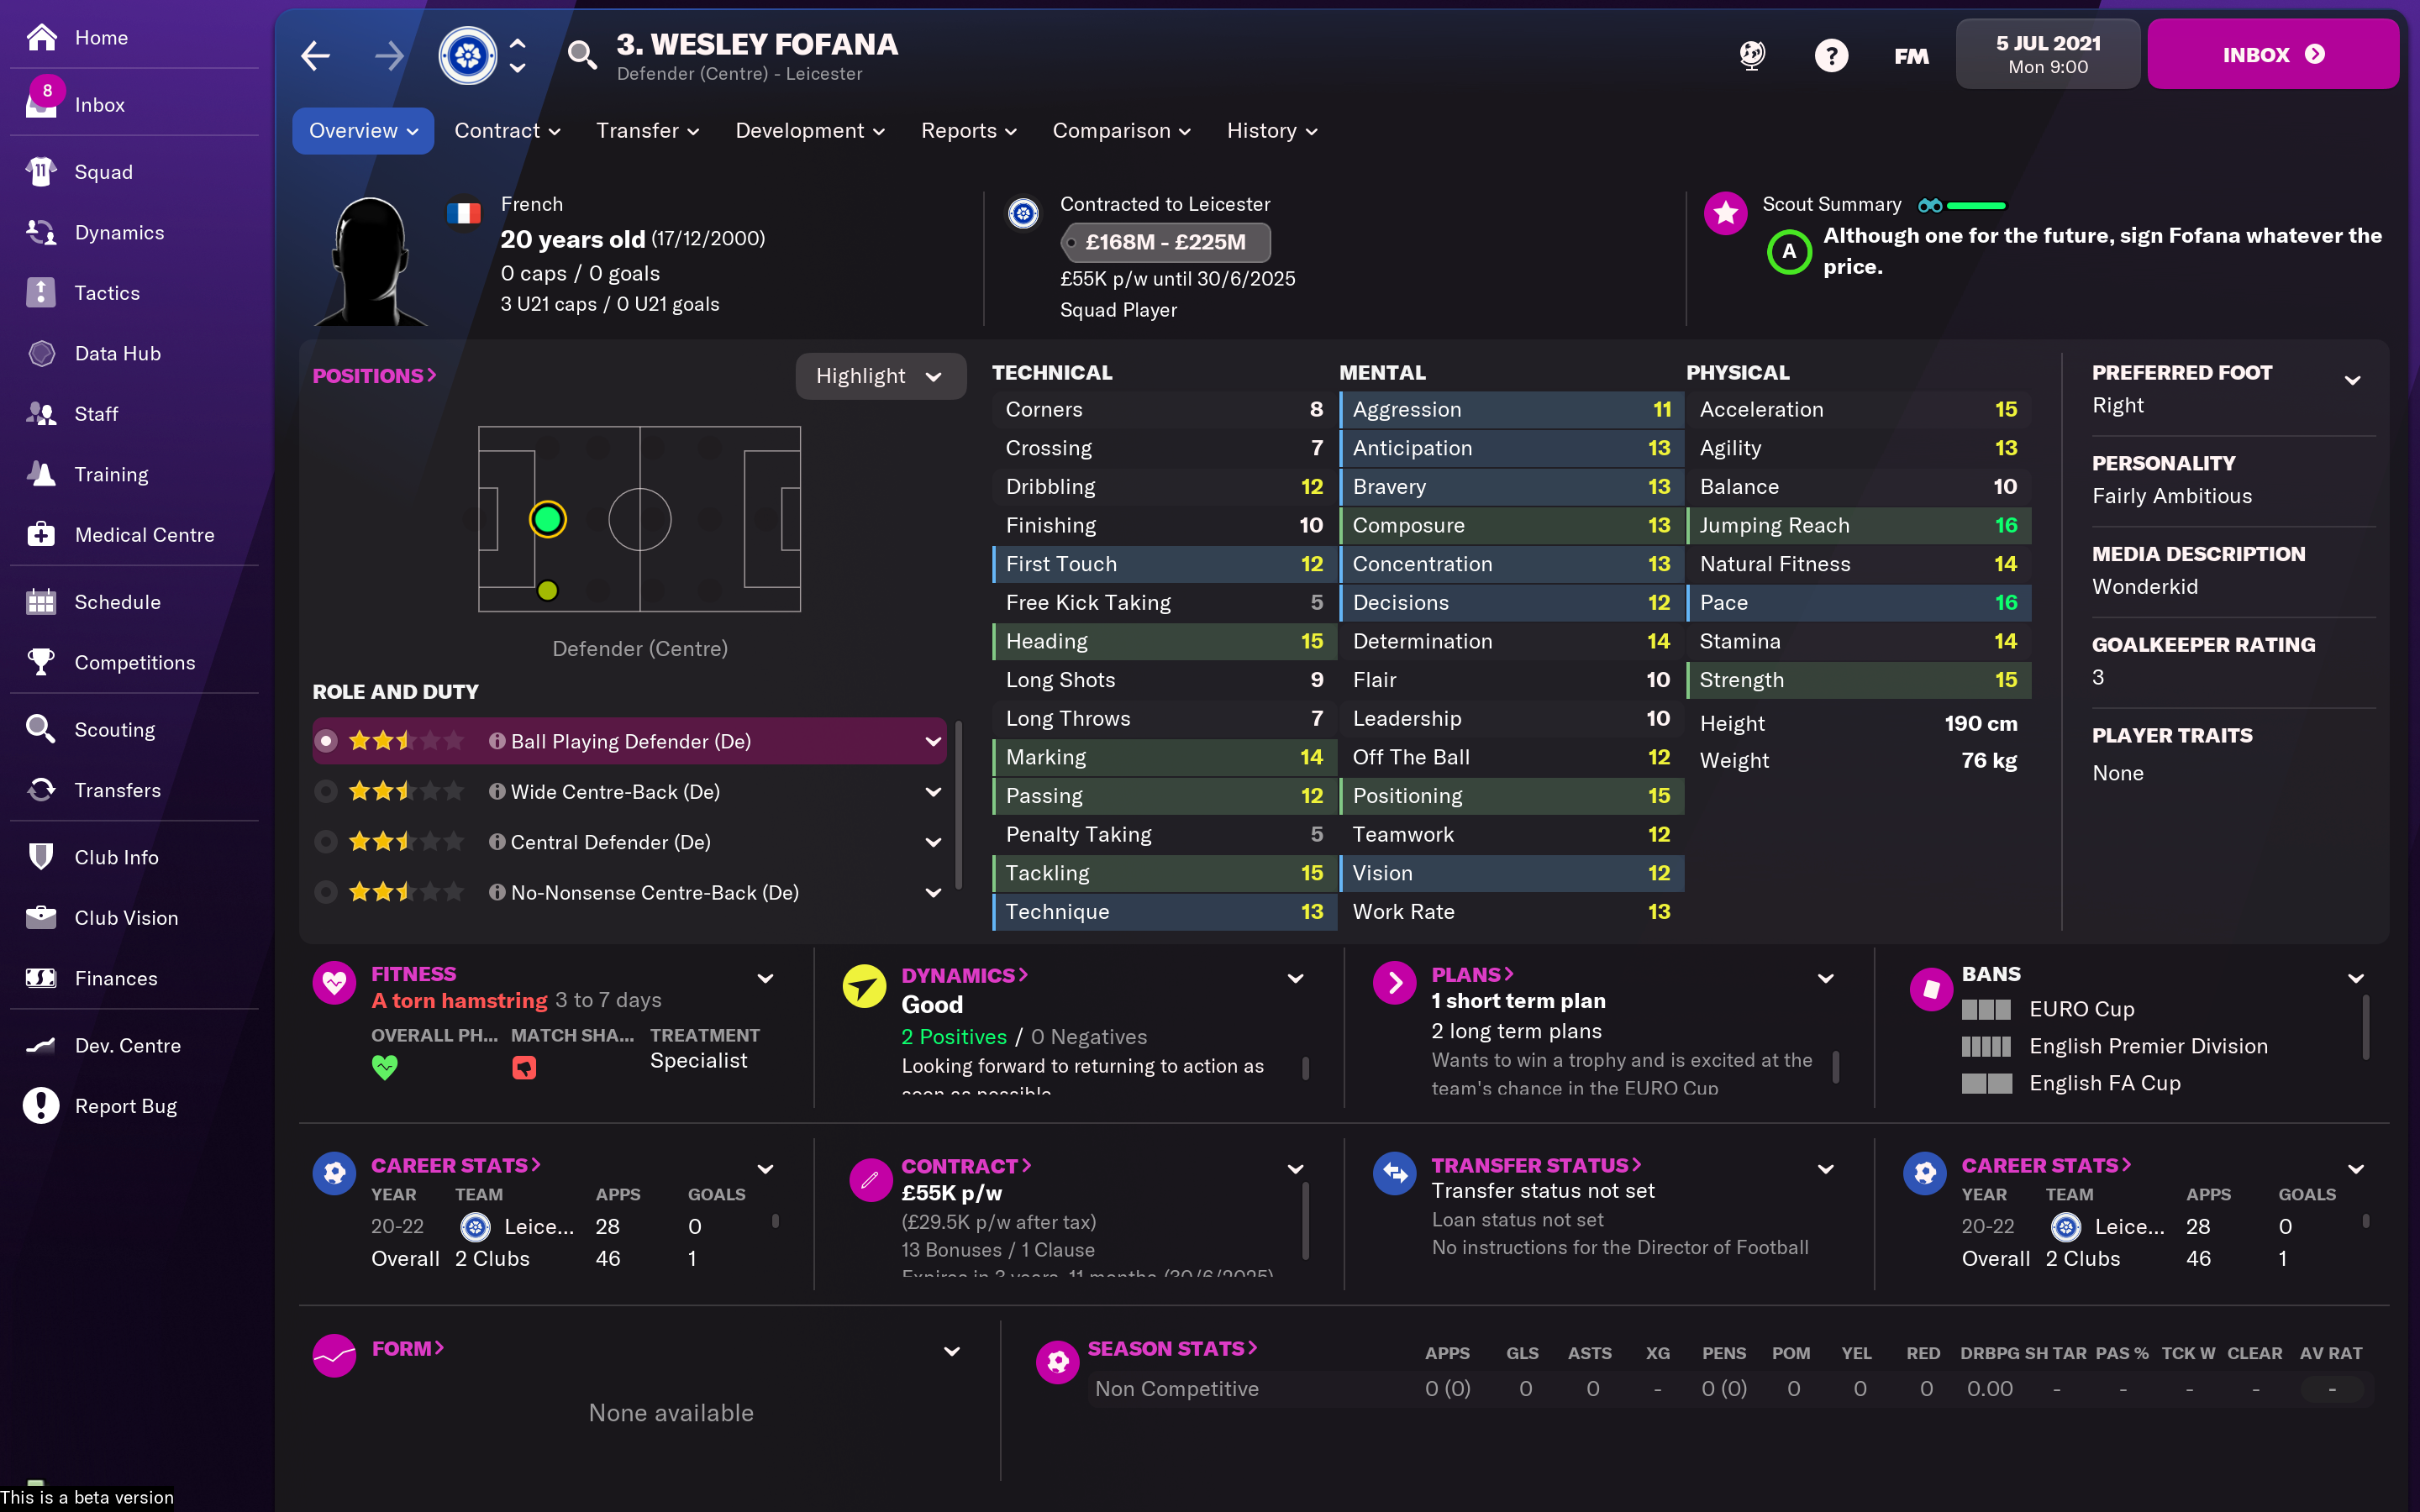 Football Manager 2022: All the FM22 wonderkids you'll need to sign